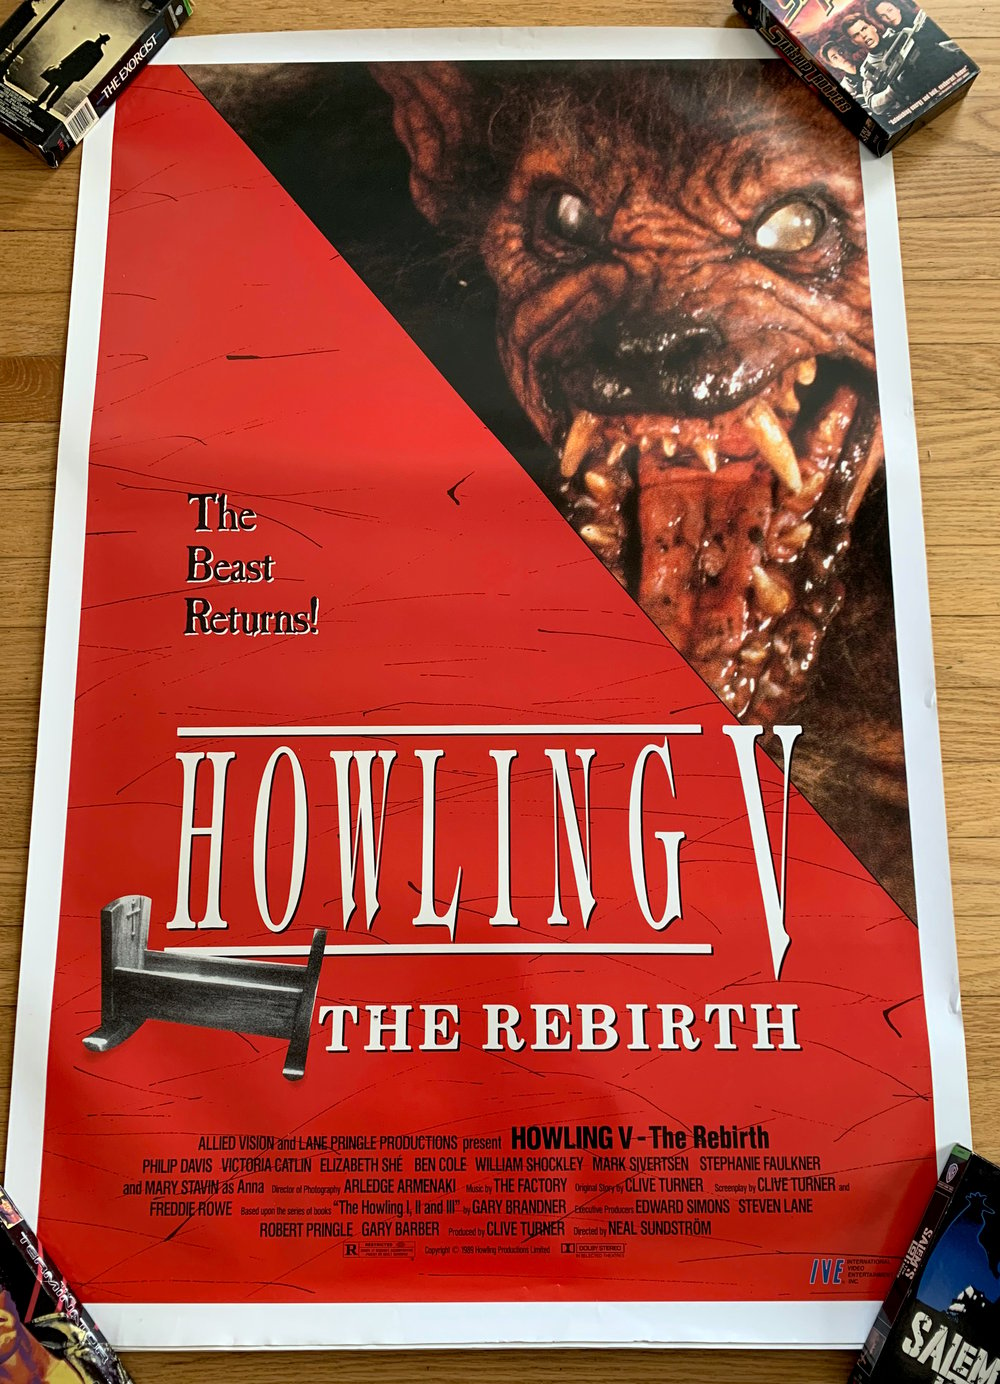 1989 HOWLING V THE REBIRTH Original IVE Home Video Promotional One Sheet Movie Poster